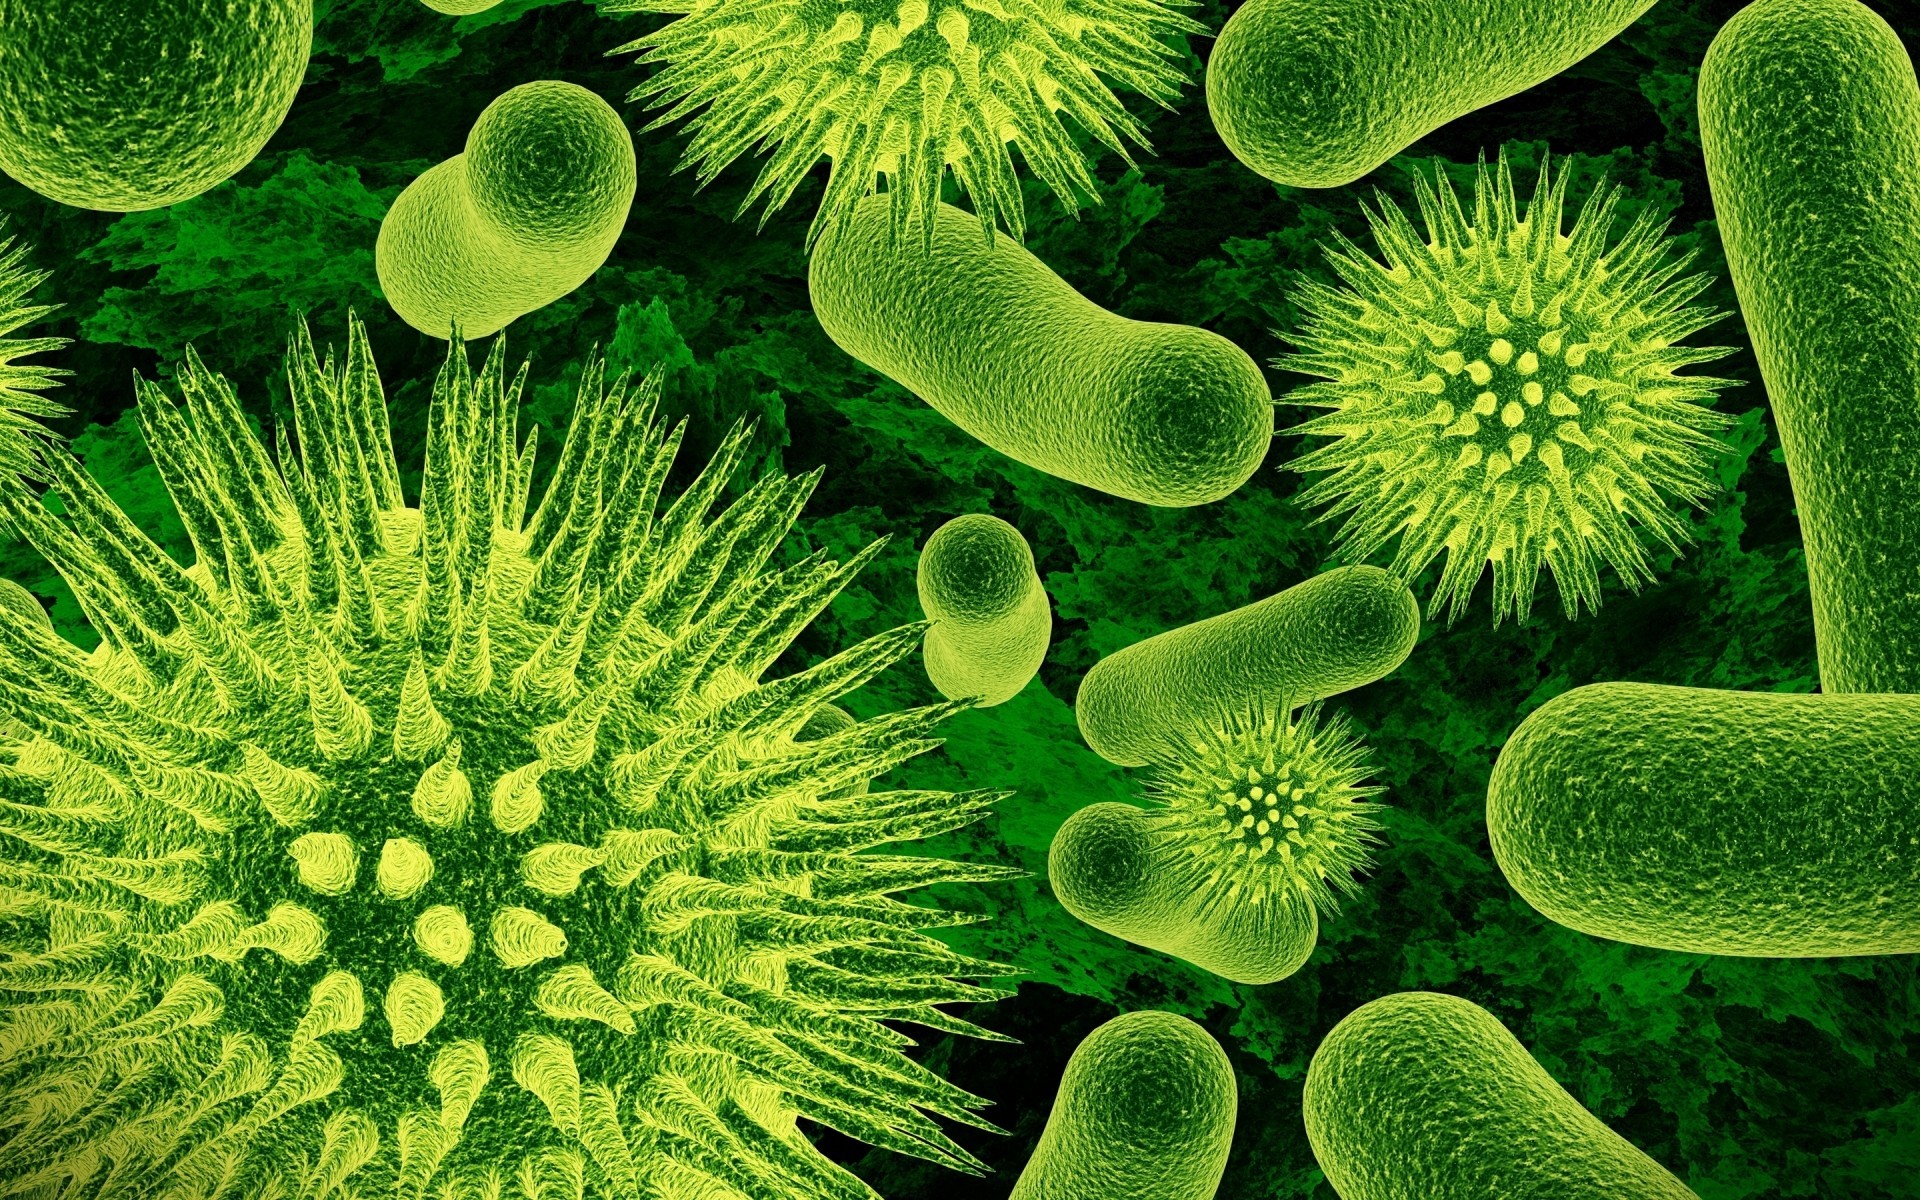 Abstract bacteria biology microbiology cellular telephone infection microbe medicine medical HD wallpaper. Android wallpapers for free